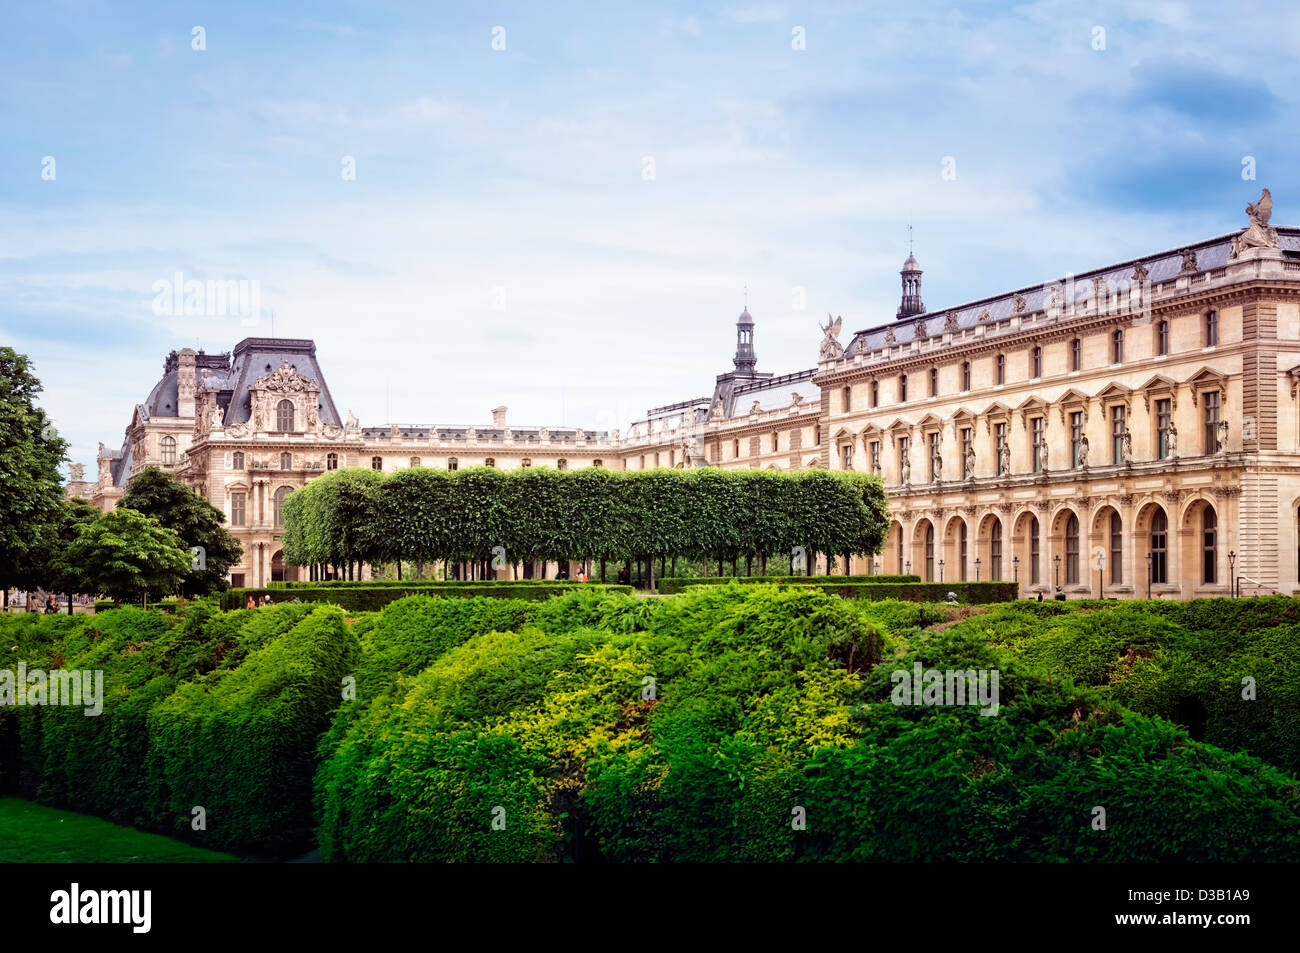 Louvre Museum and The Tuileries Garden in Paris. Stock Photo